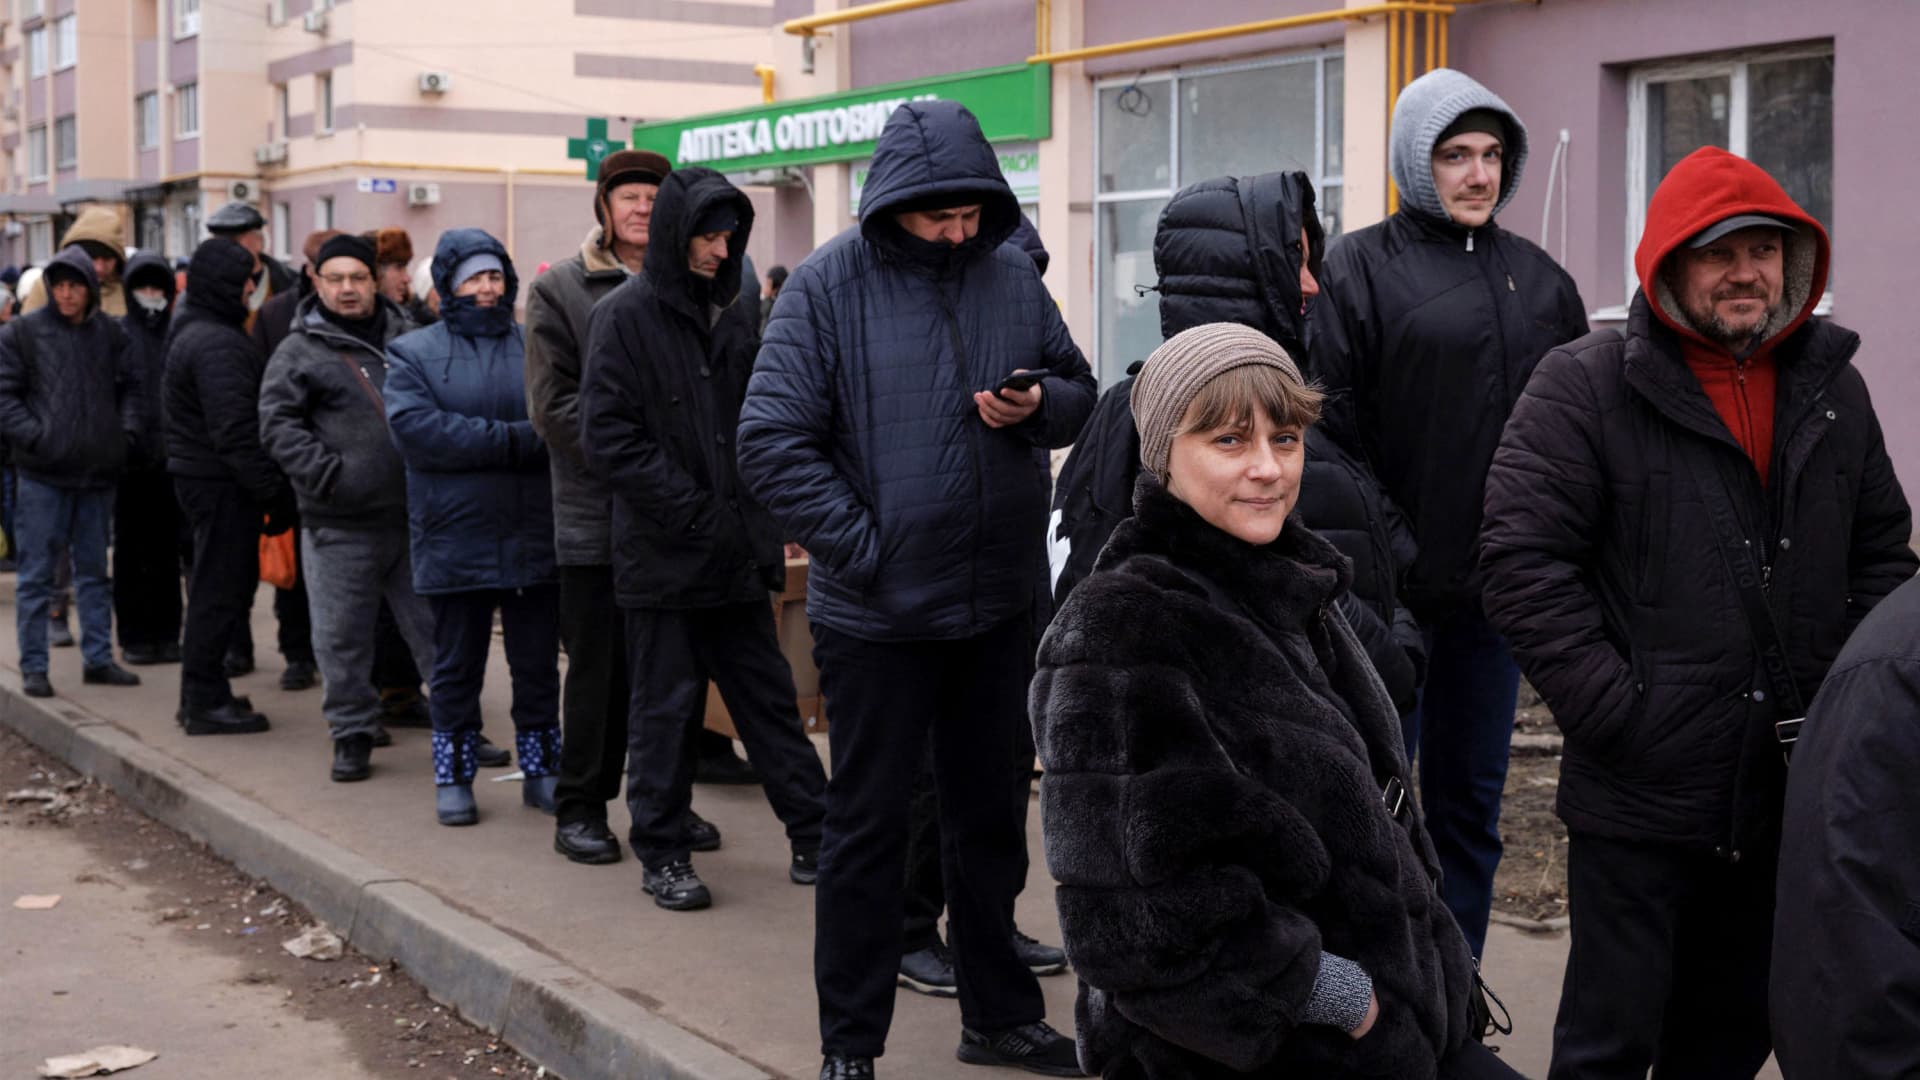 People line up for food handed out by volunteers at a humanitarian aid distribution point, as Russia's attack on Ukraine continues, in Kharkiv, Ukraine, March 28, 2022.